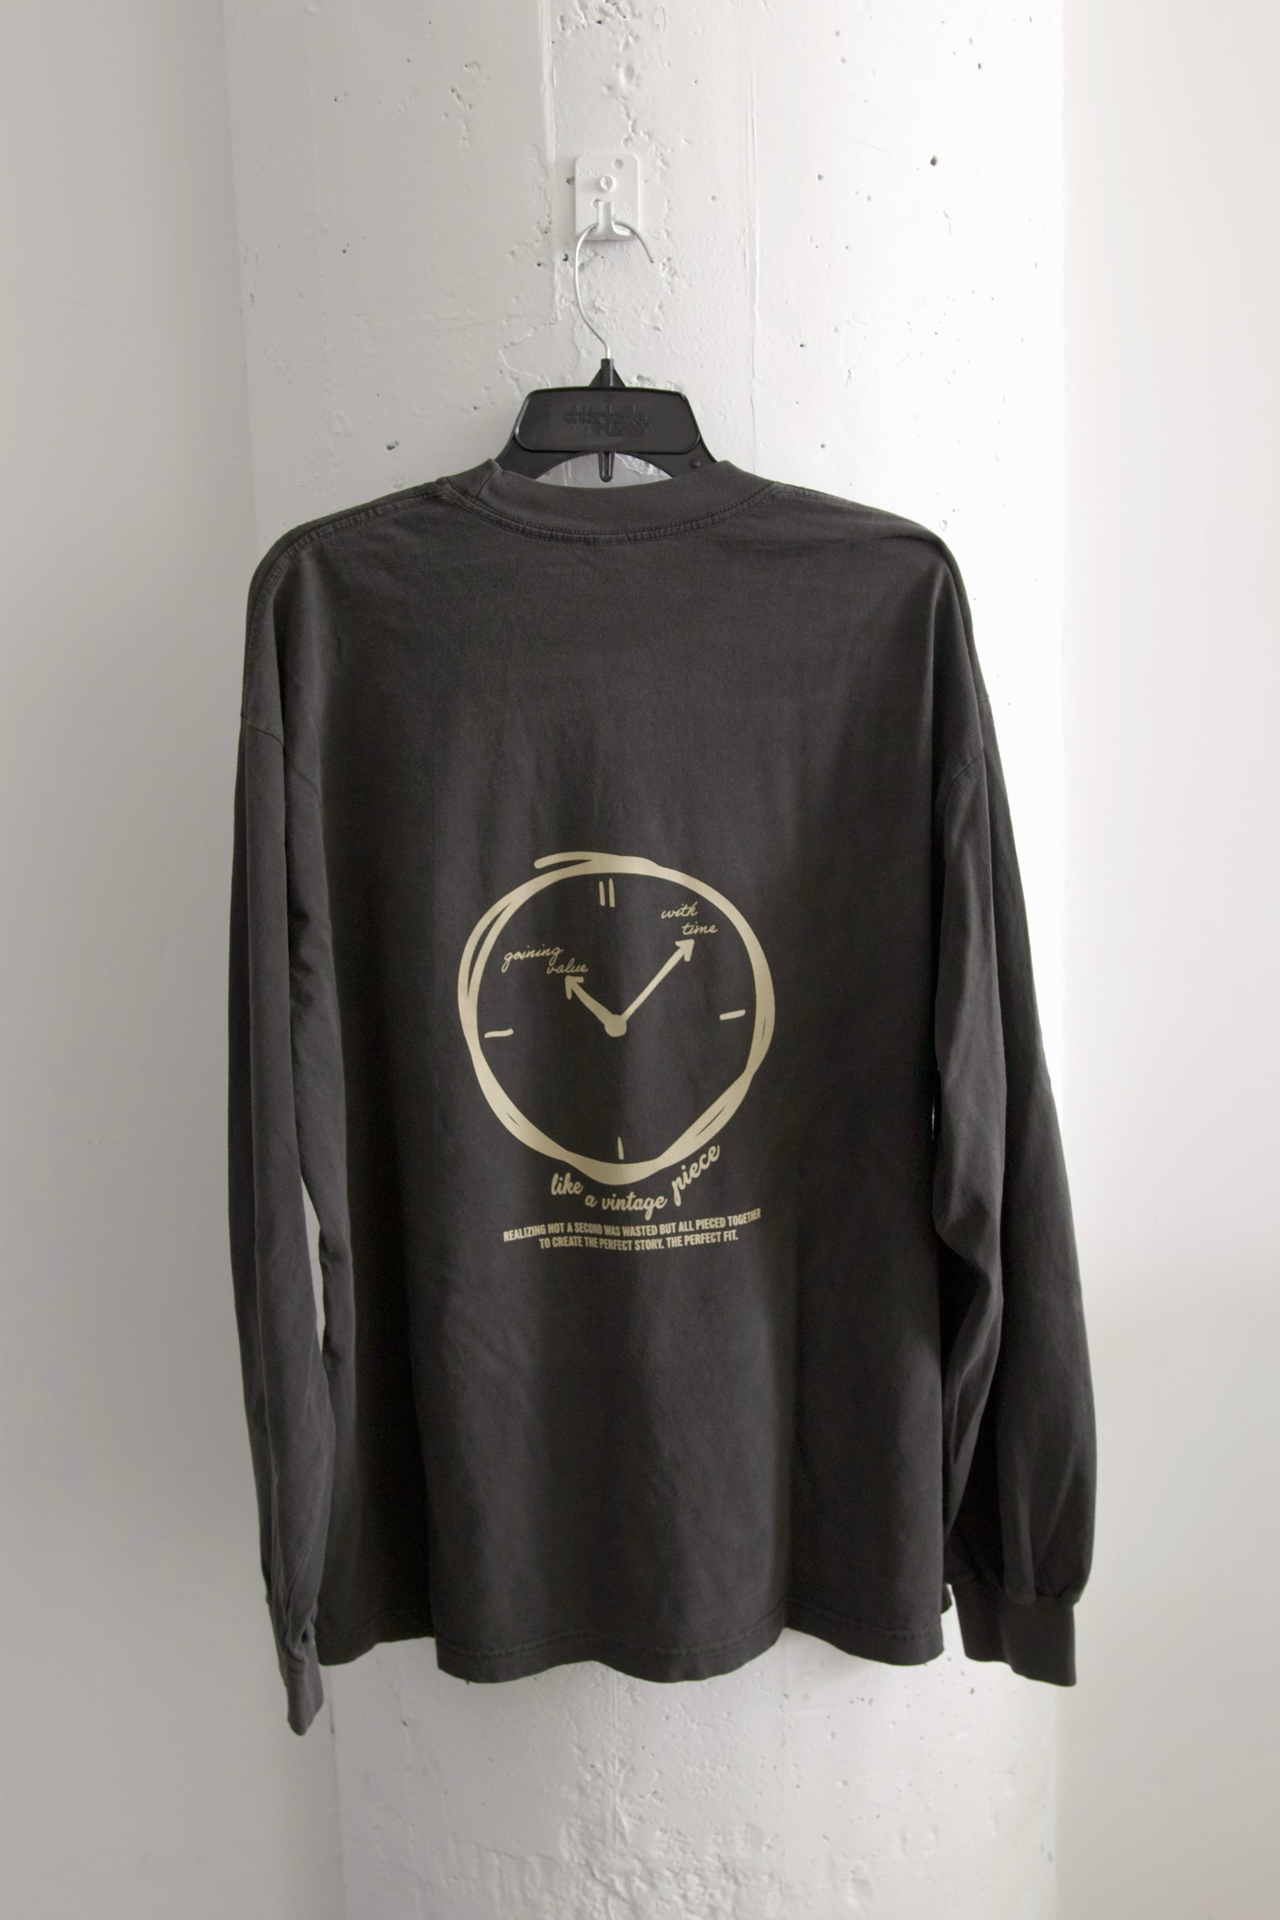 *Low Stock* With Time Long Sleeve - Vintage Black